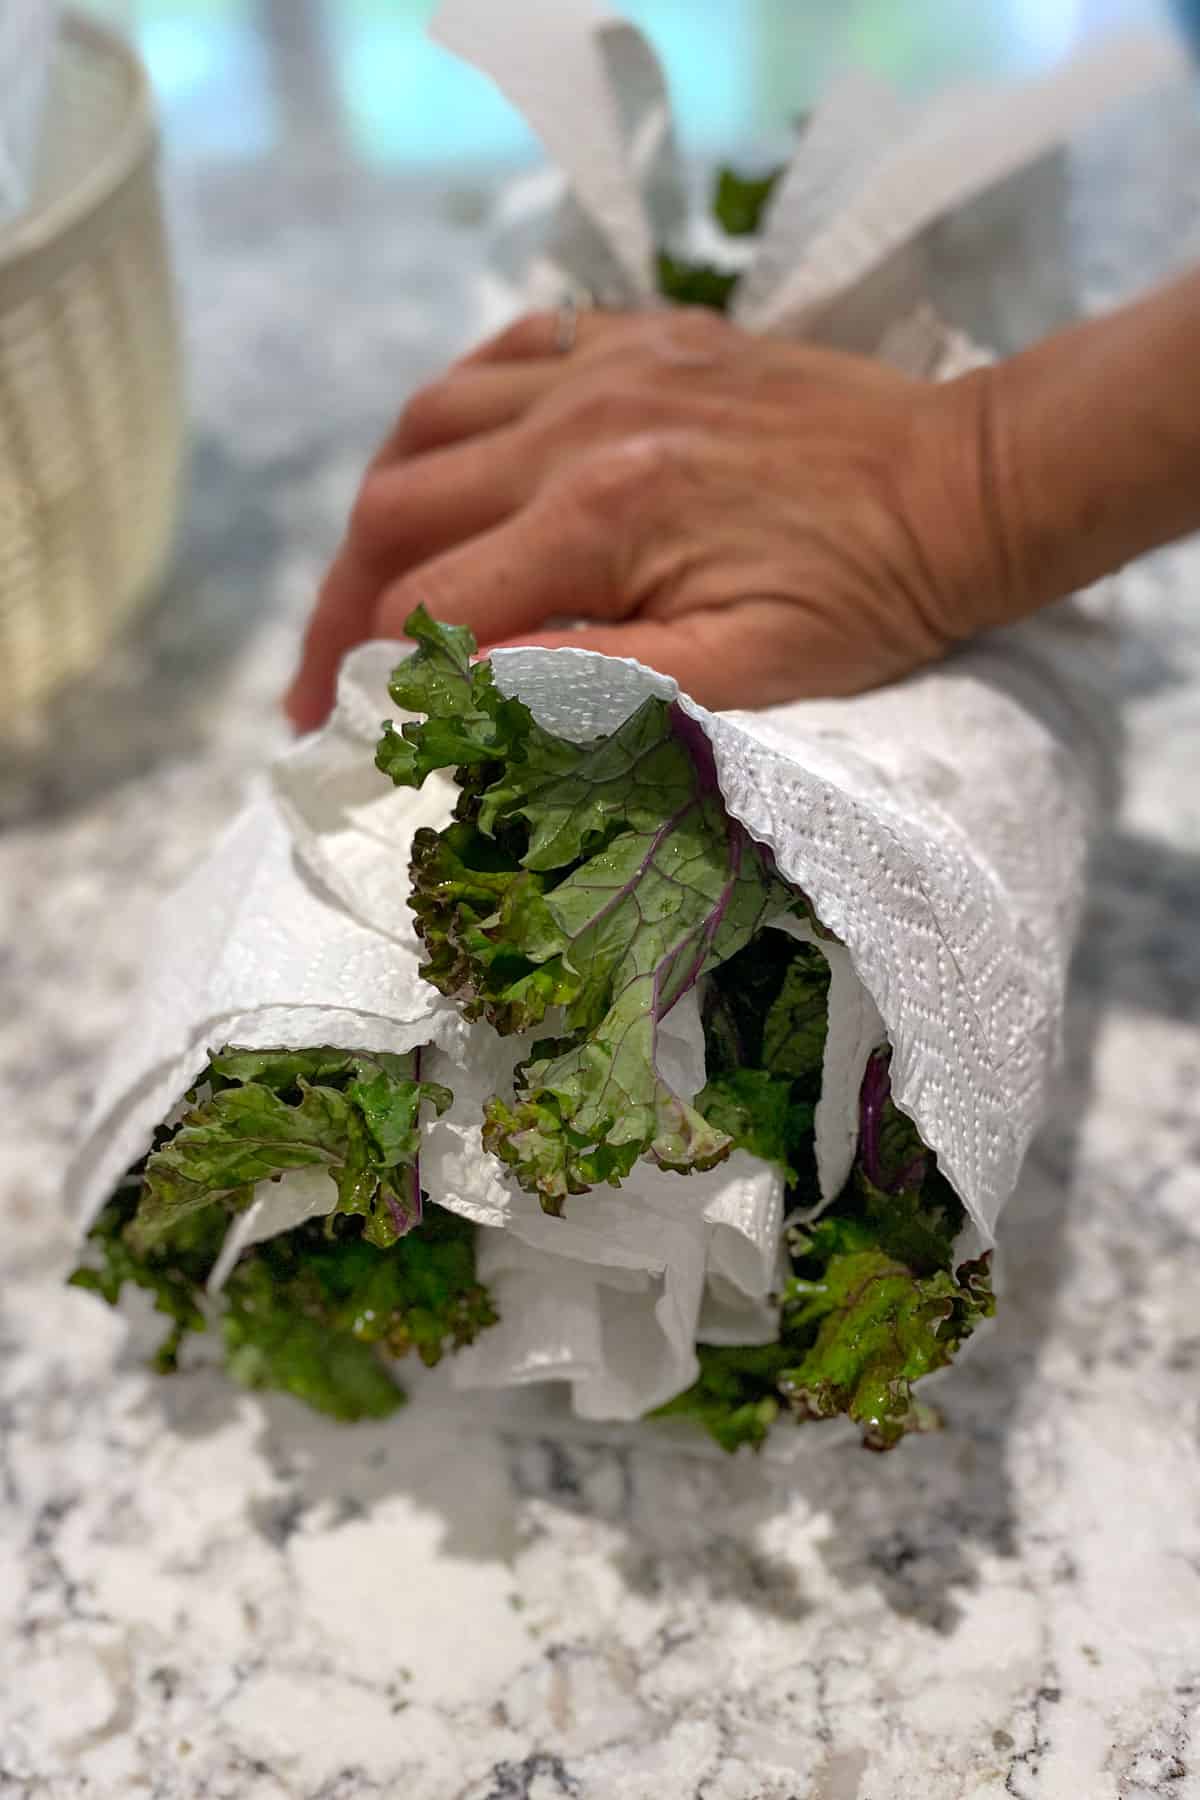 A hand shown rolling up a bunch of curly kale leaves in paper towels